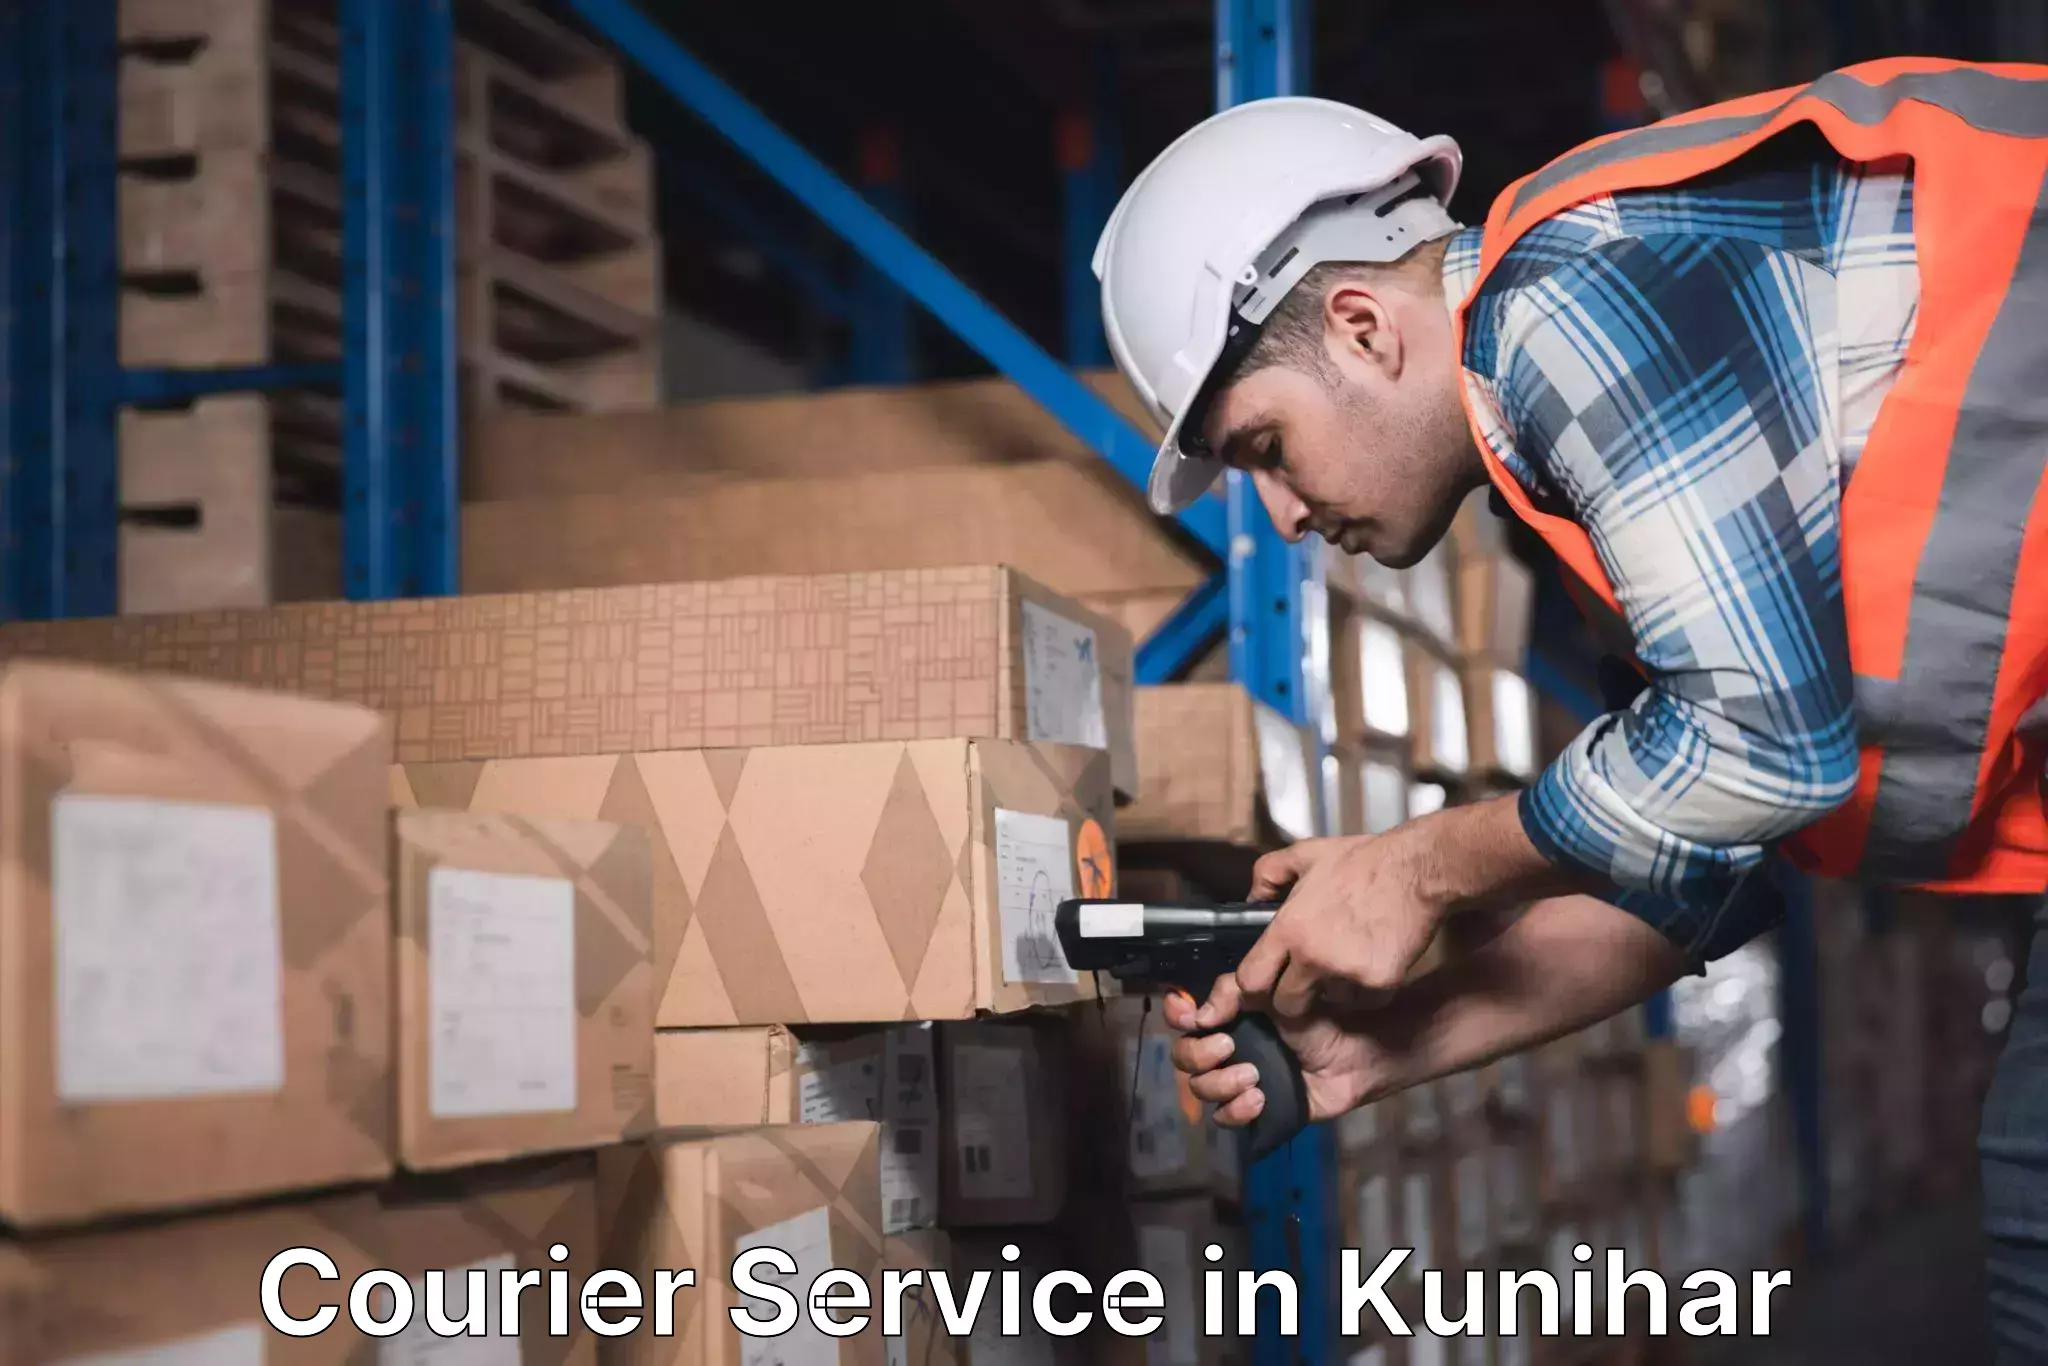 Secure shipping methods in Kunihar